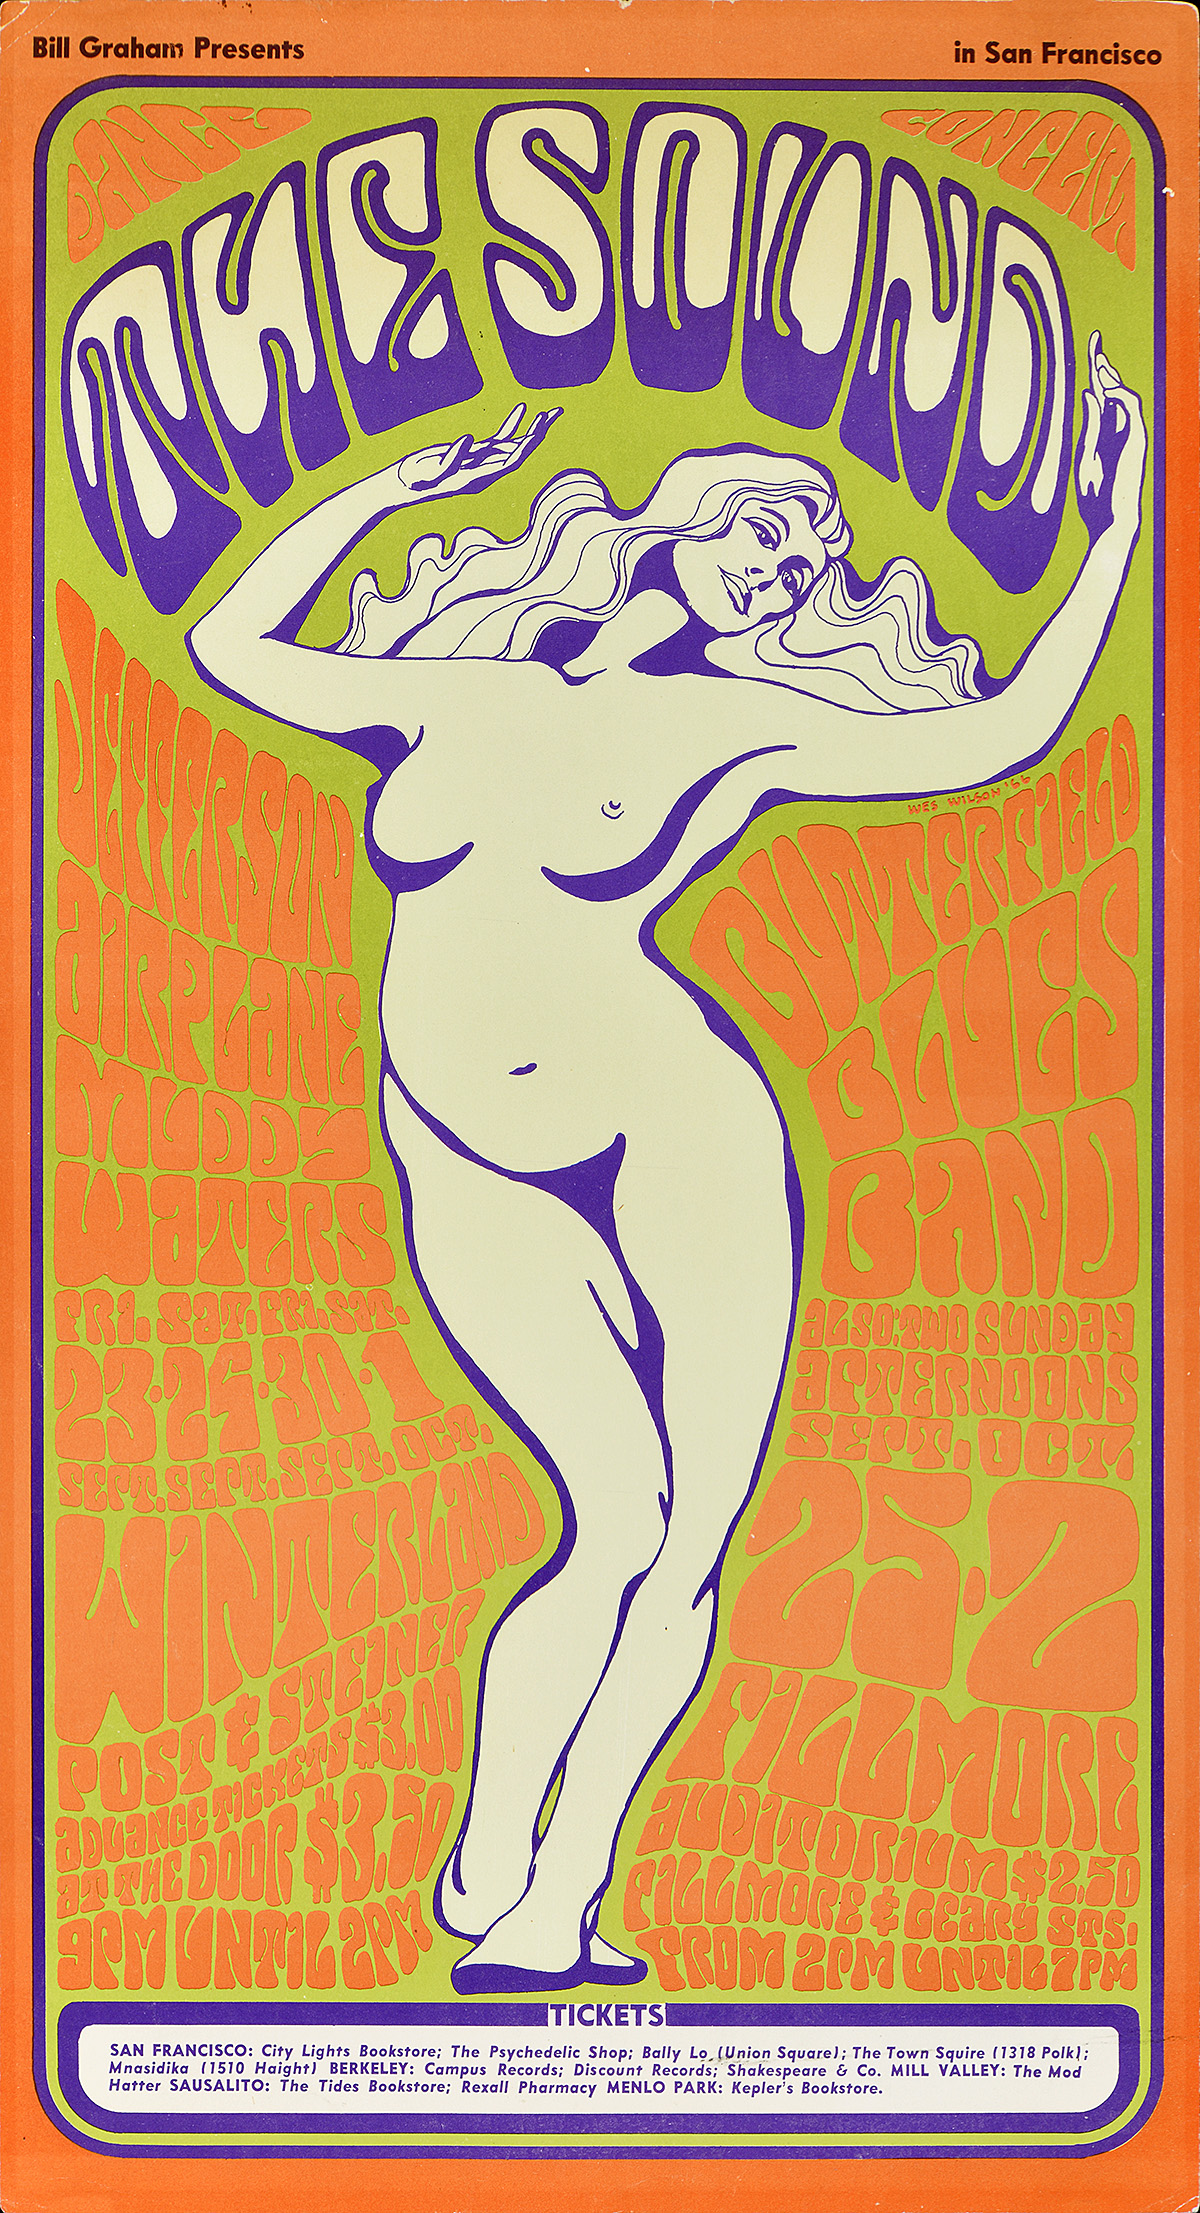 Photo-offset poster of a naked figure posing, surrounded by text.